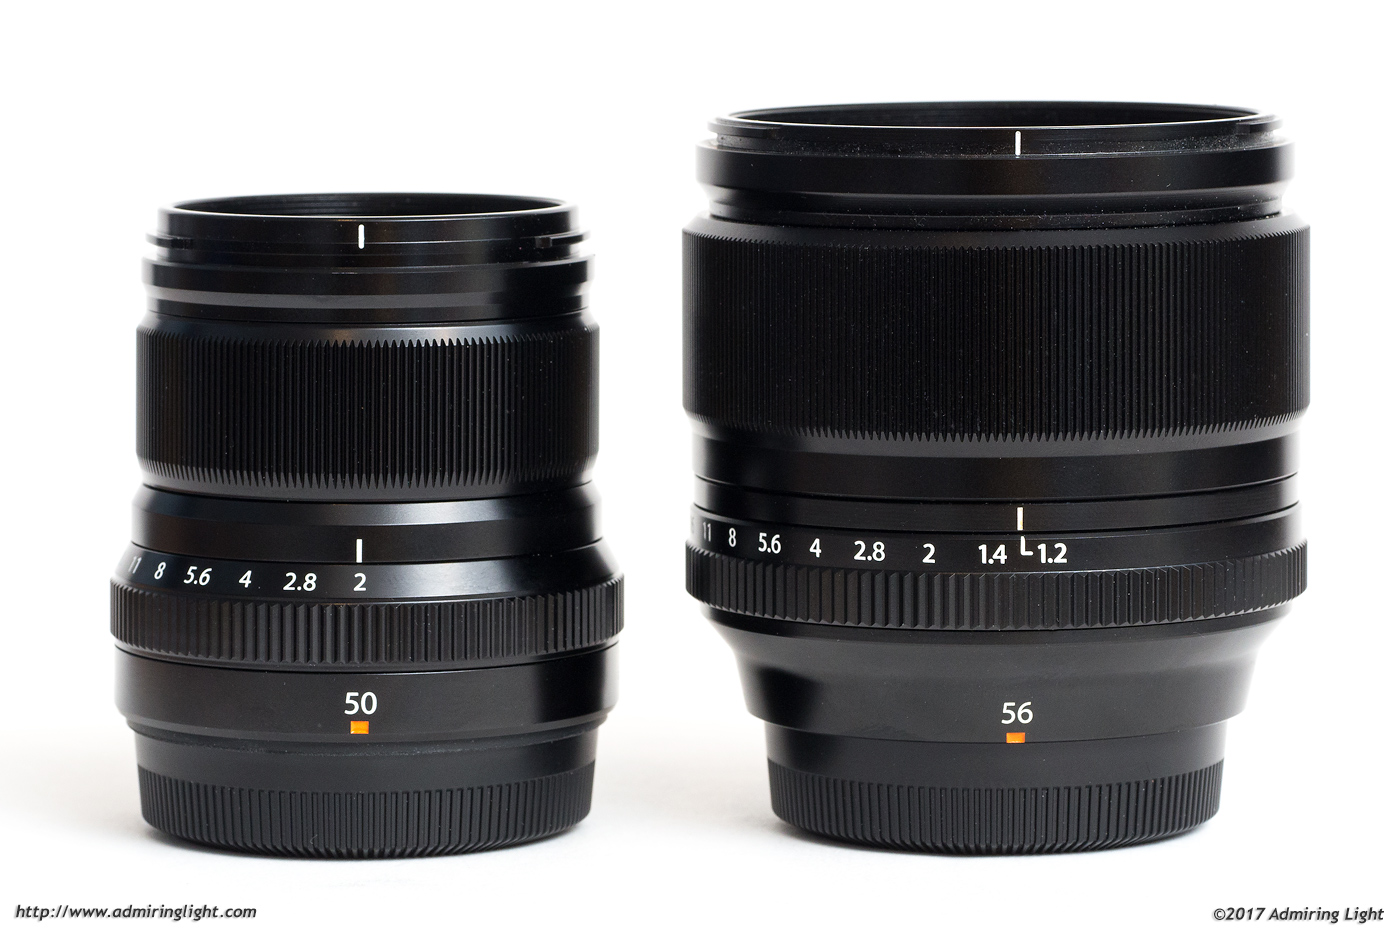 The Fujinon XF 50mm f/2 WR and the XF 56mm f/1.2